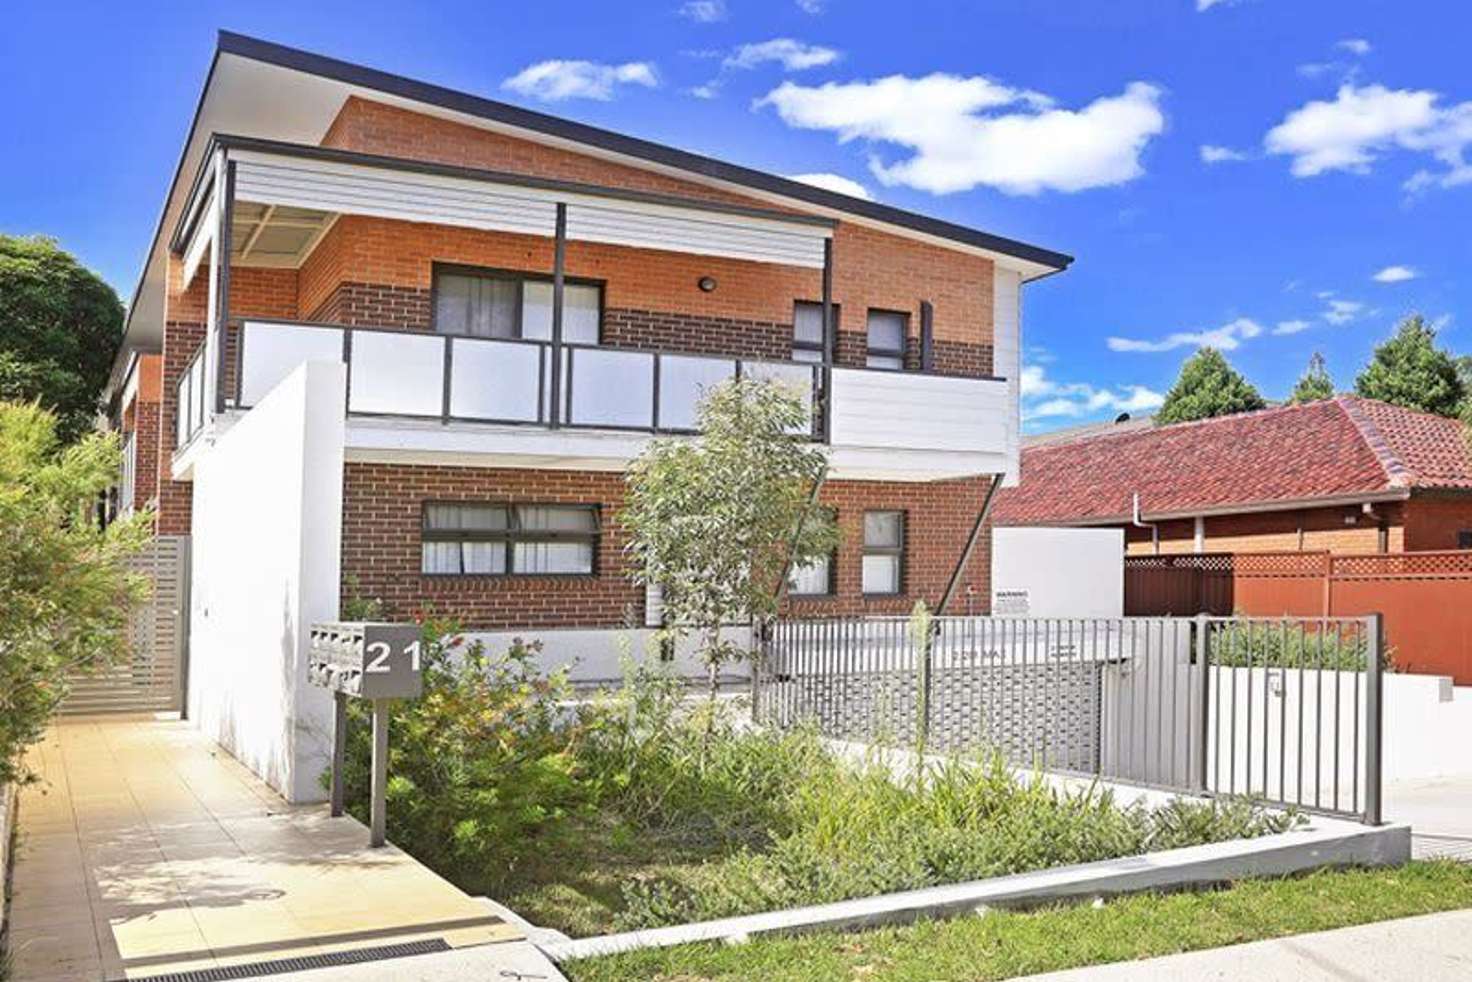 Main view of Homely townhouse listing, 8/21 St Ann, Merrylands NSW 2160